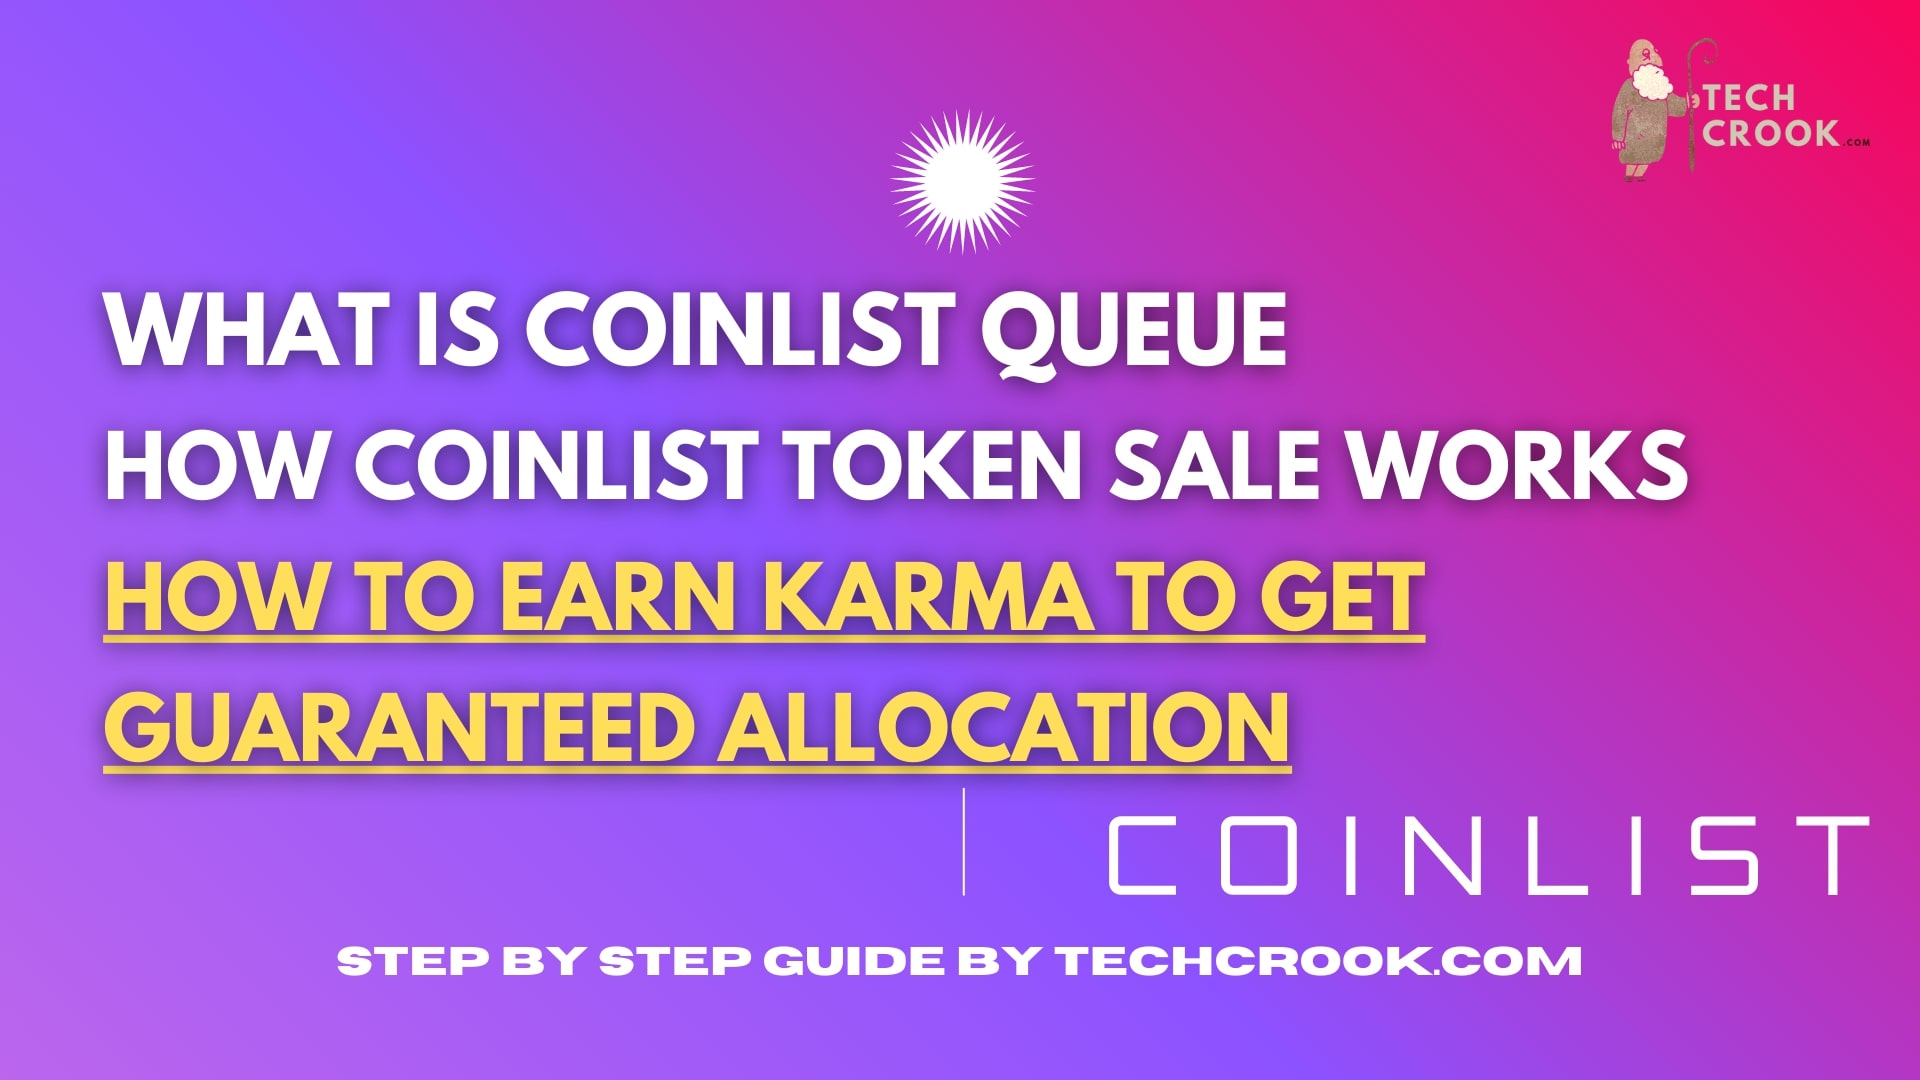 What is Coinlist Queue, How Coinlist Token sale Works, What is Coinlist Karma, and how to earn Karma